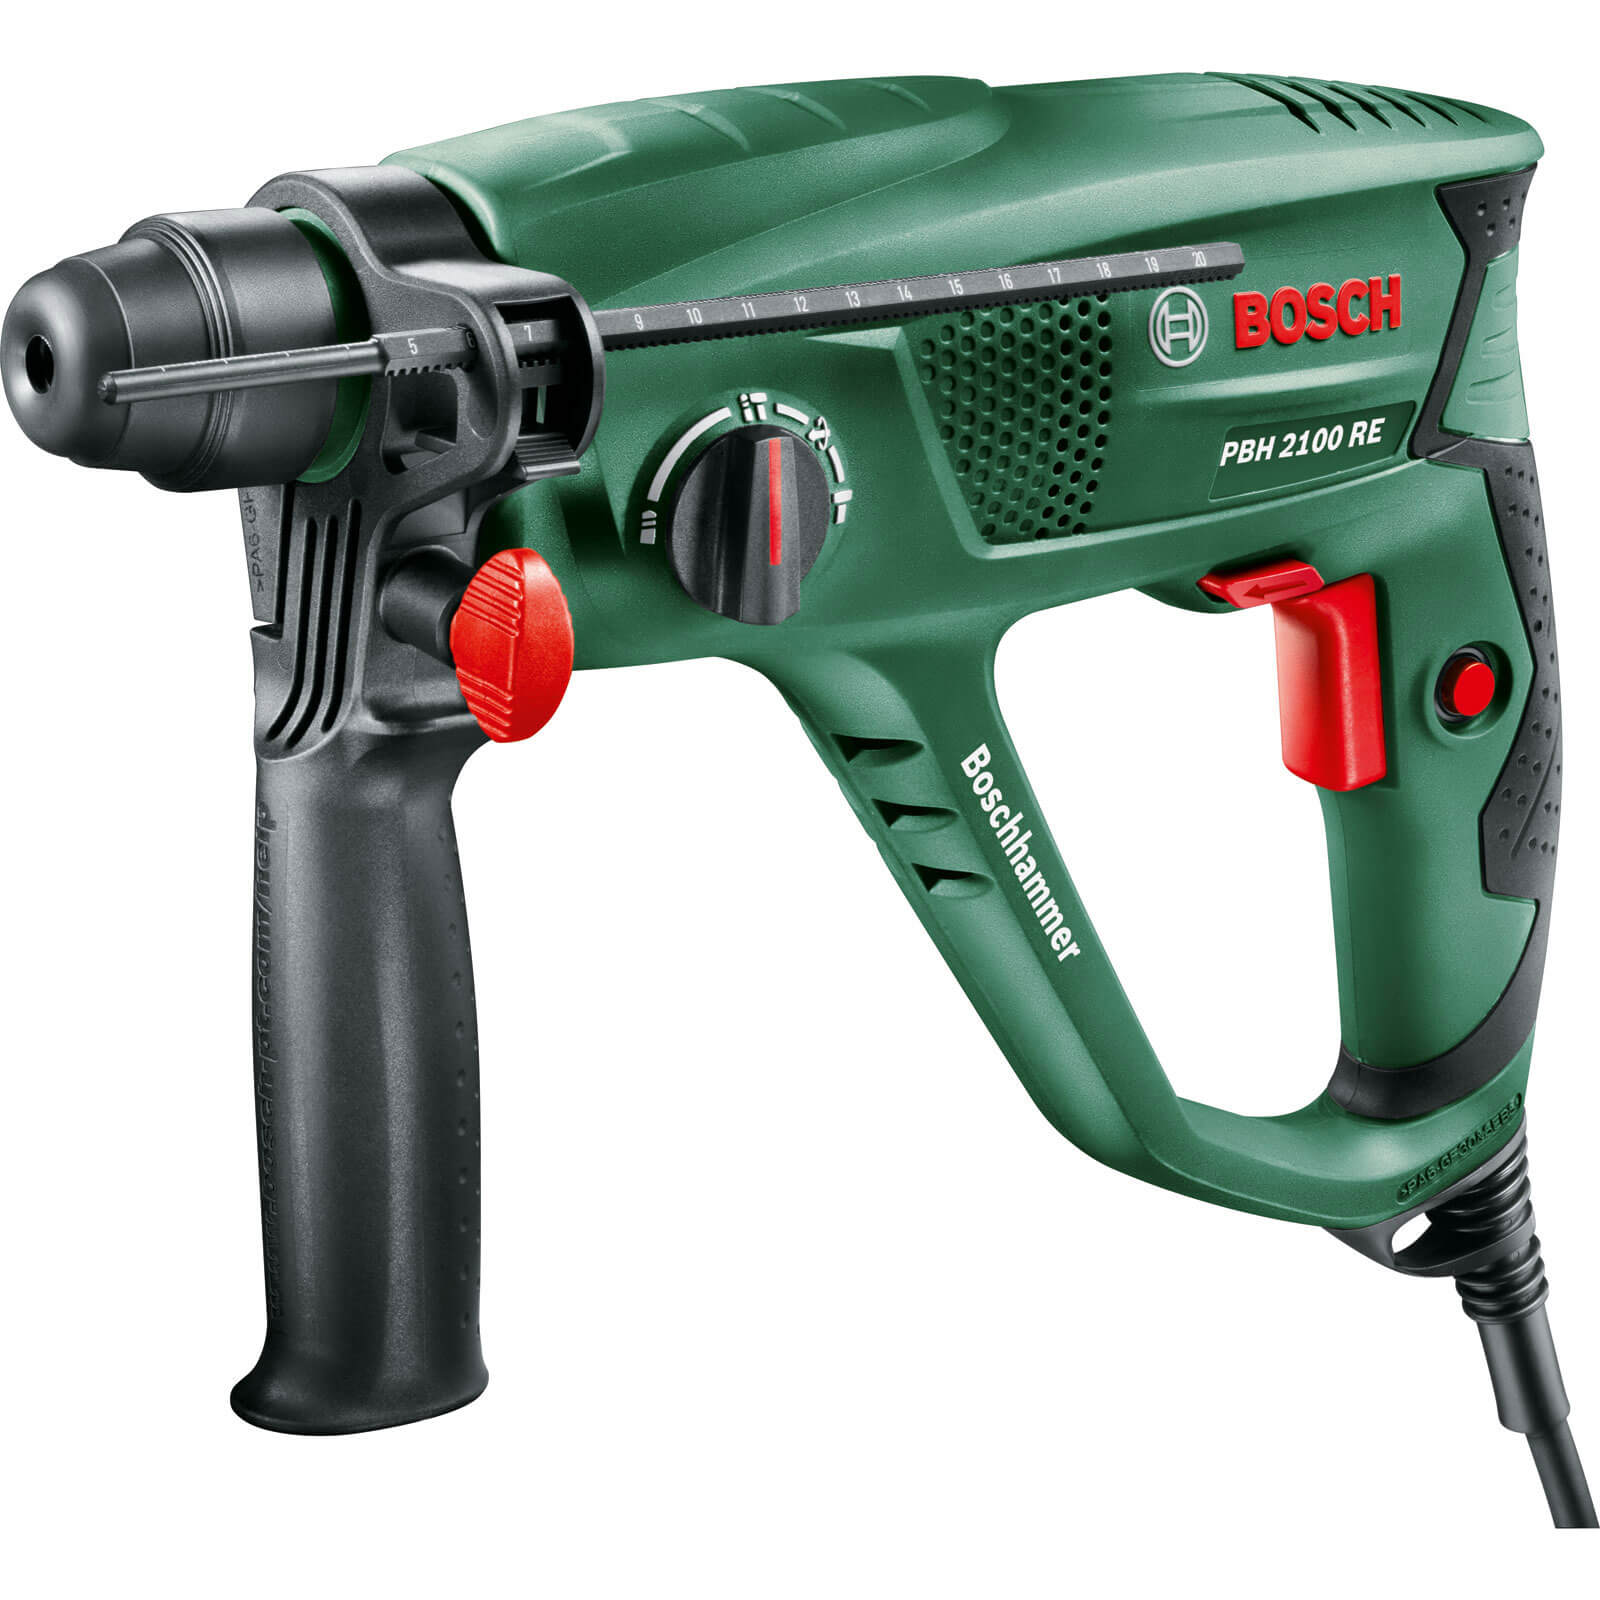 Image of Bosch PBH 2100 RE Compact SDS Plus Hammer Drill 240v